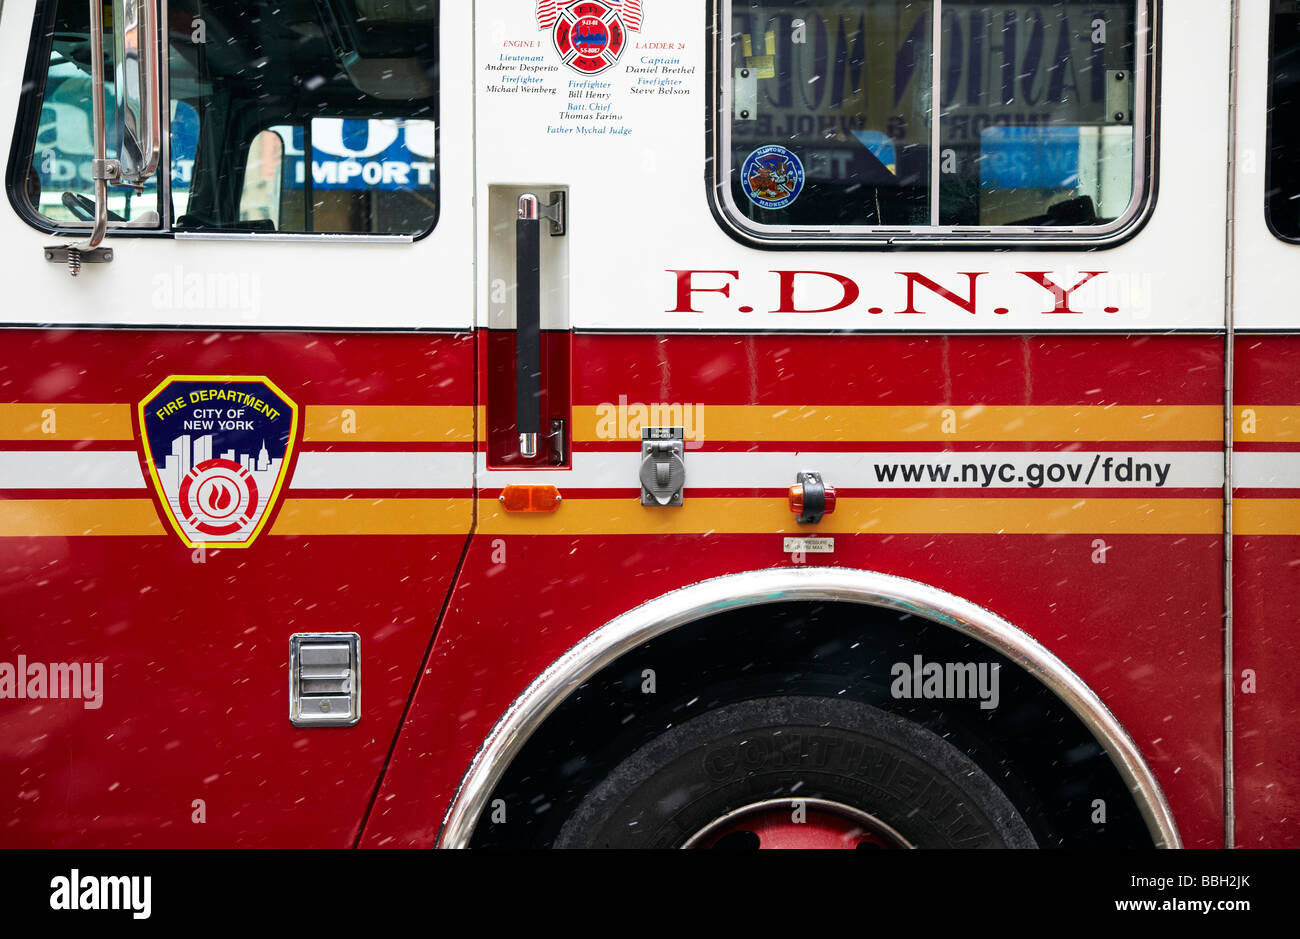 fire Engine, fire engine, FDNY Stock Photo